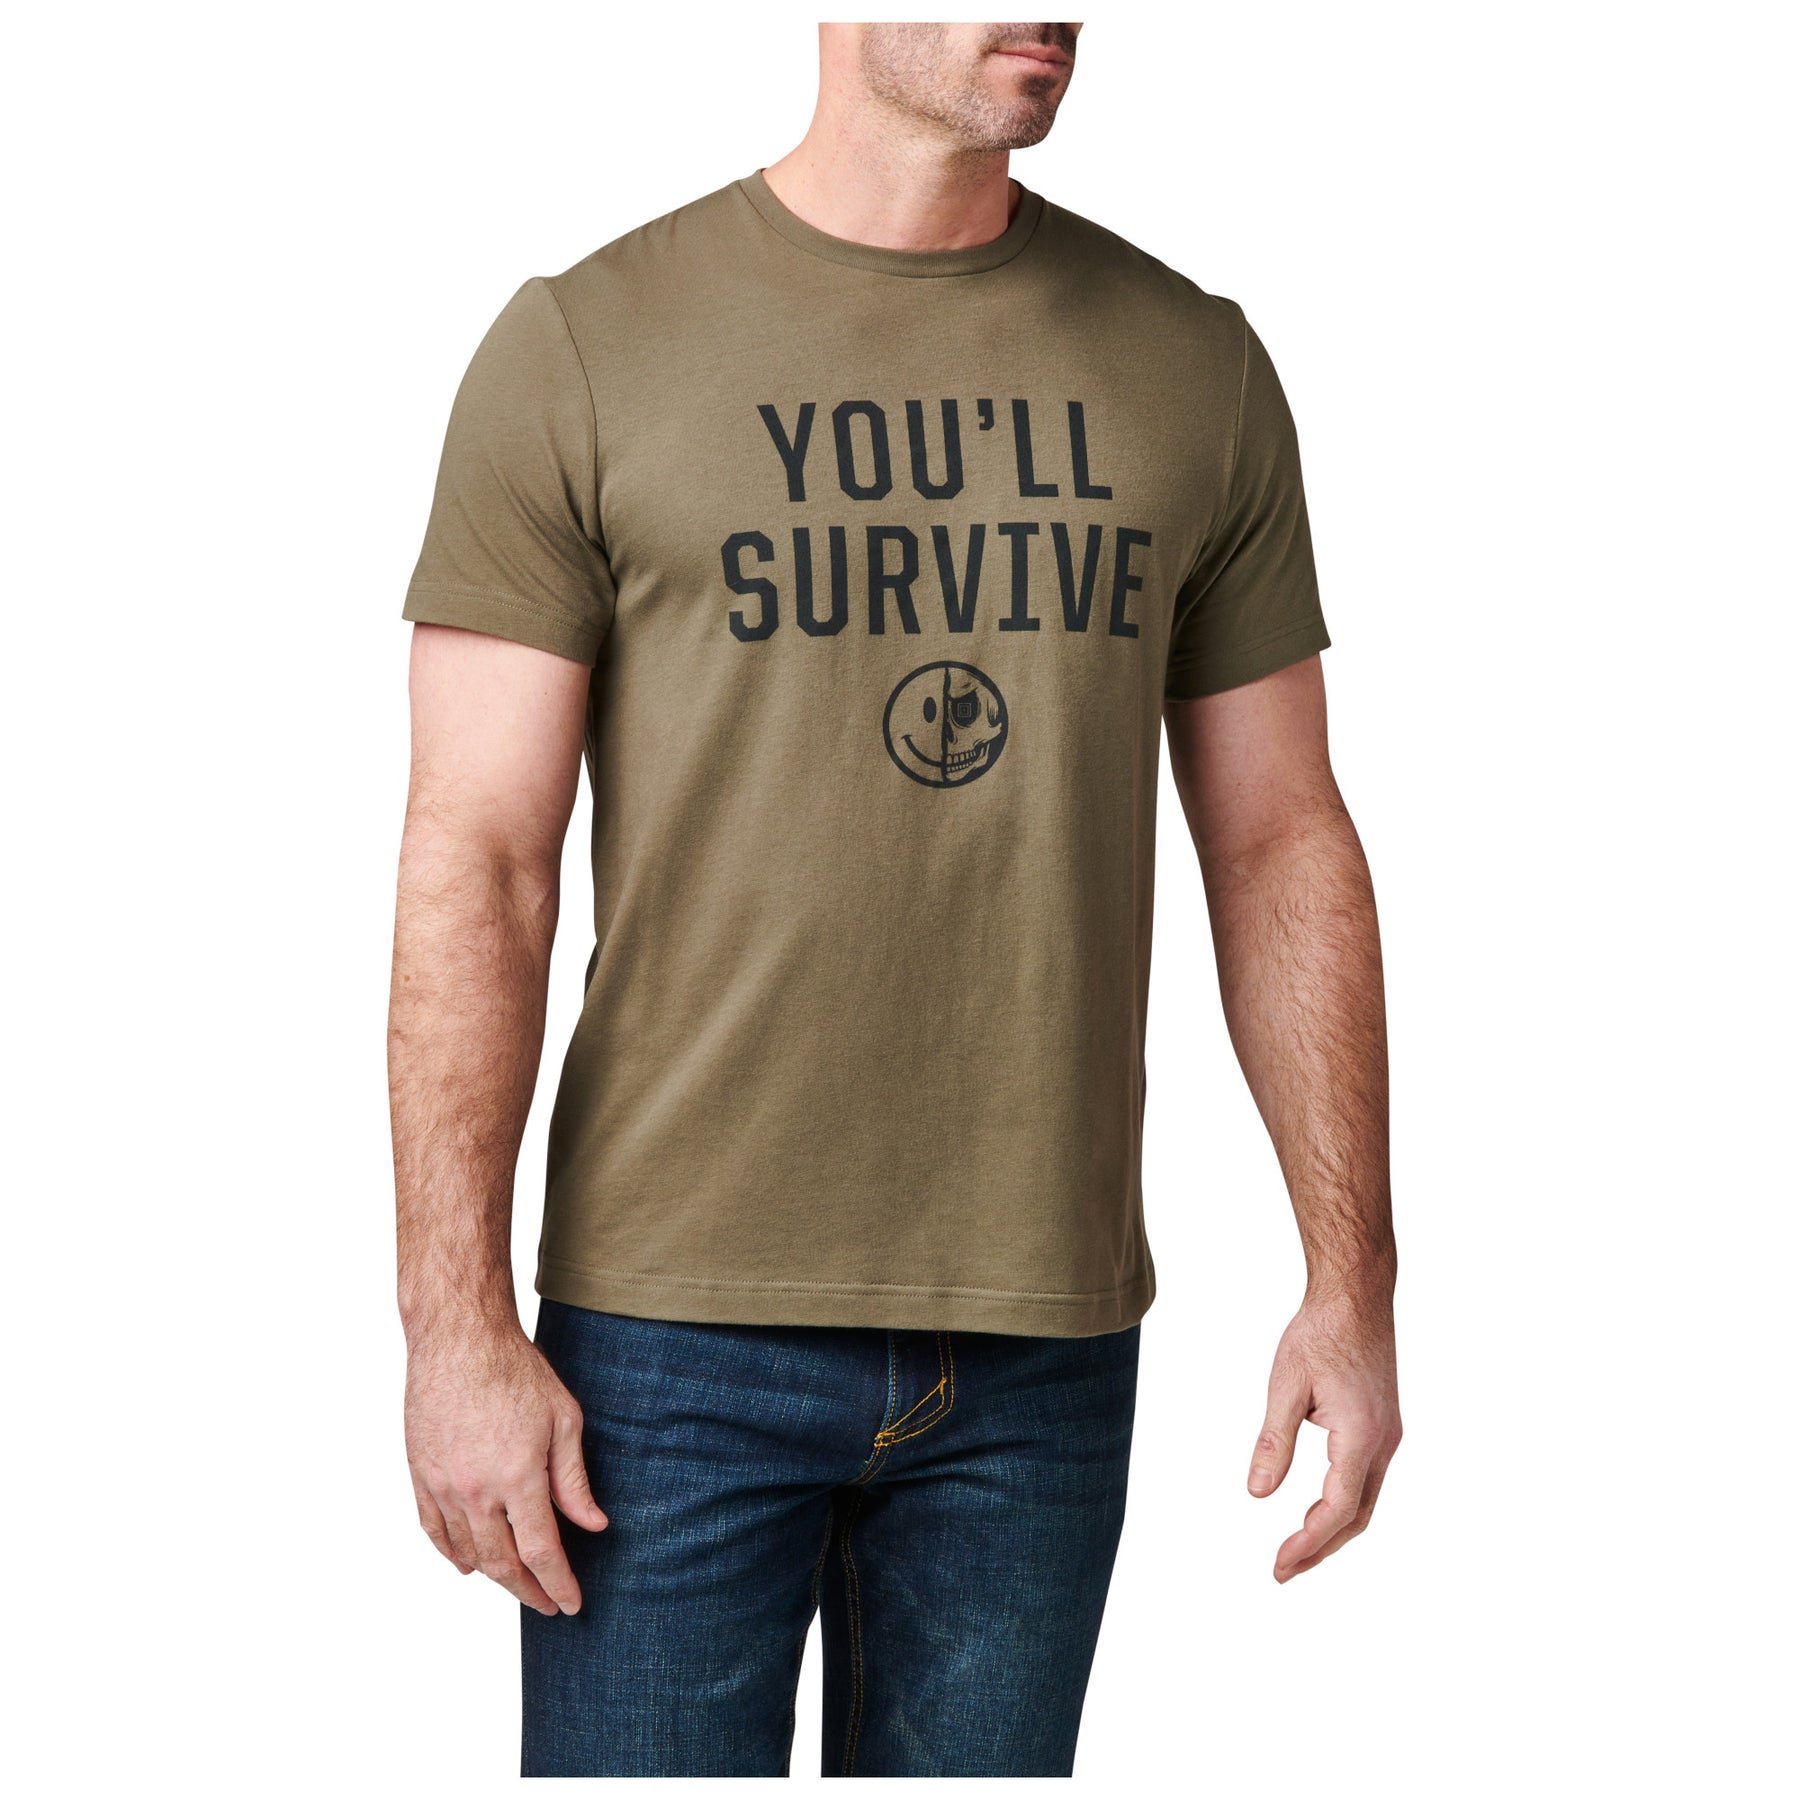 5.11 | YOU'LL SURVIVE TEE - T-Shirt